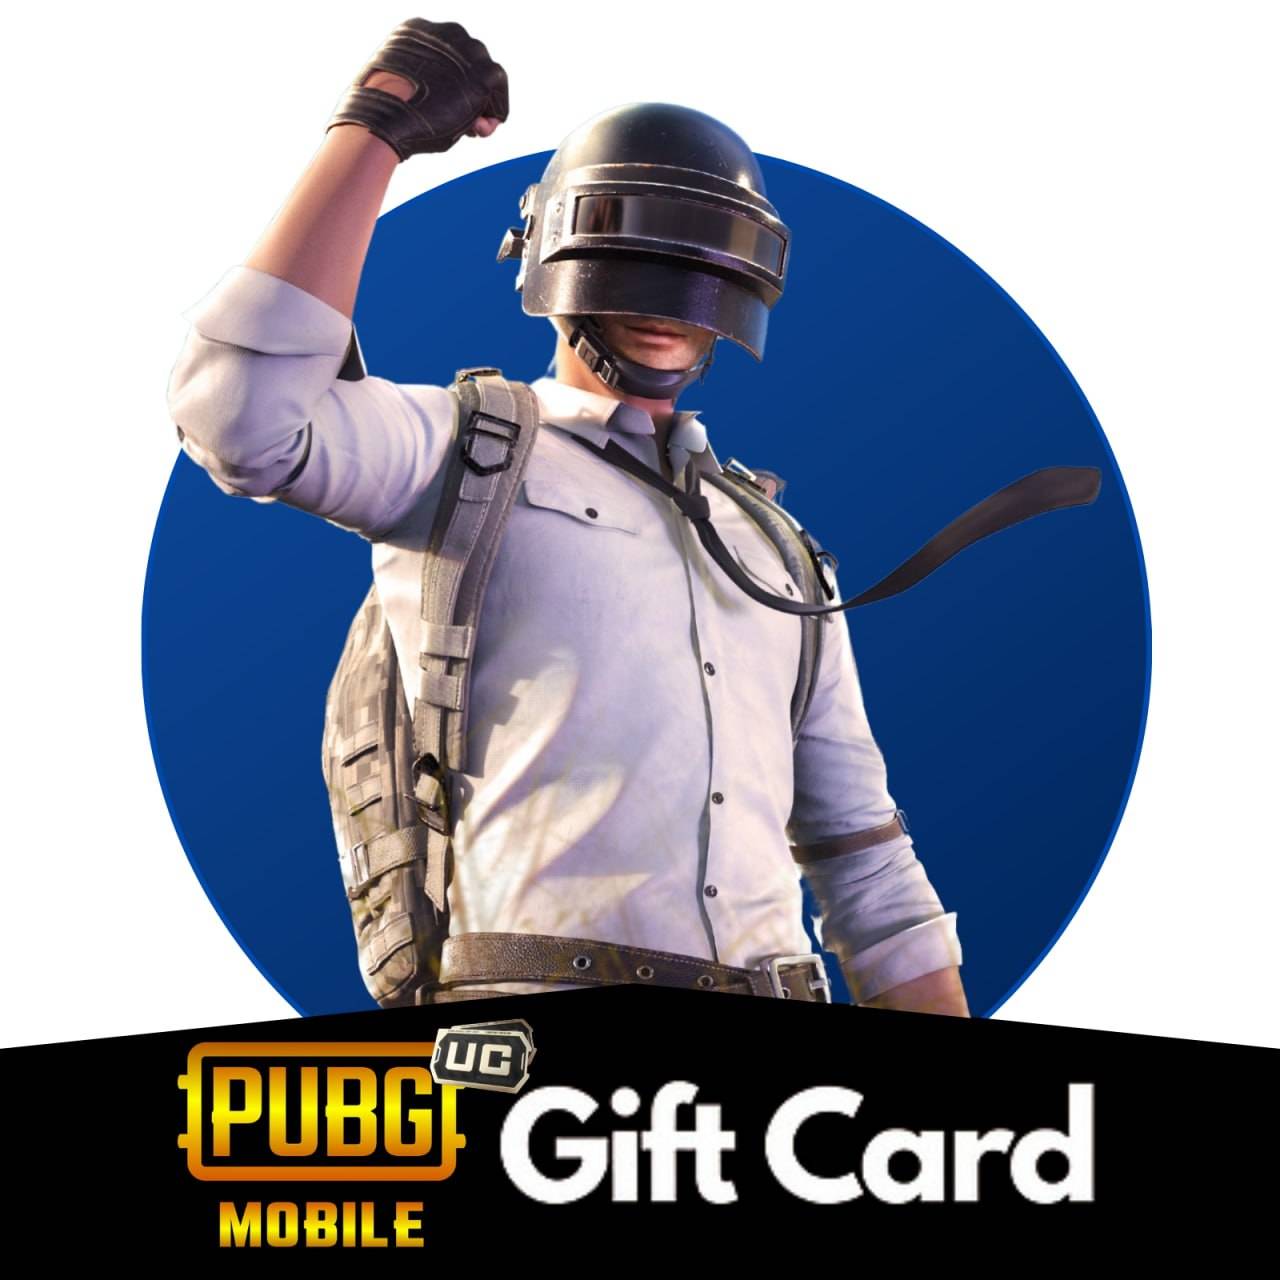 gift card pubg mobile - home page